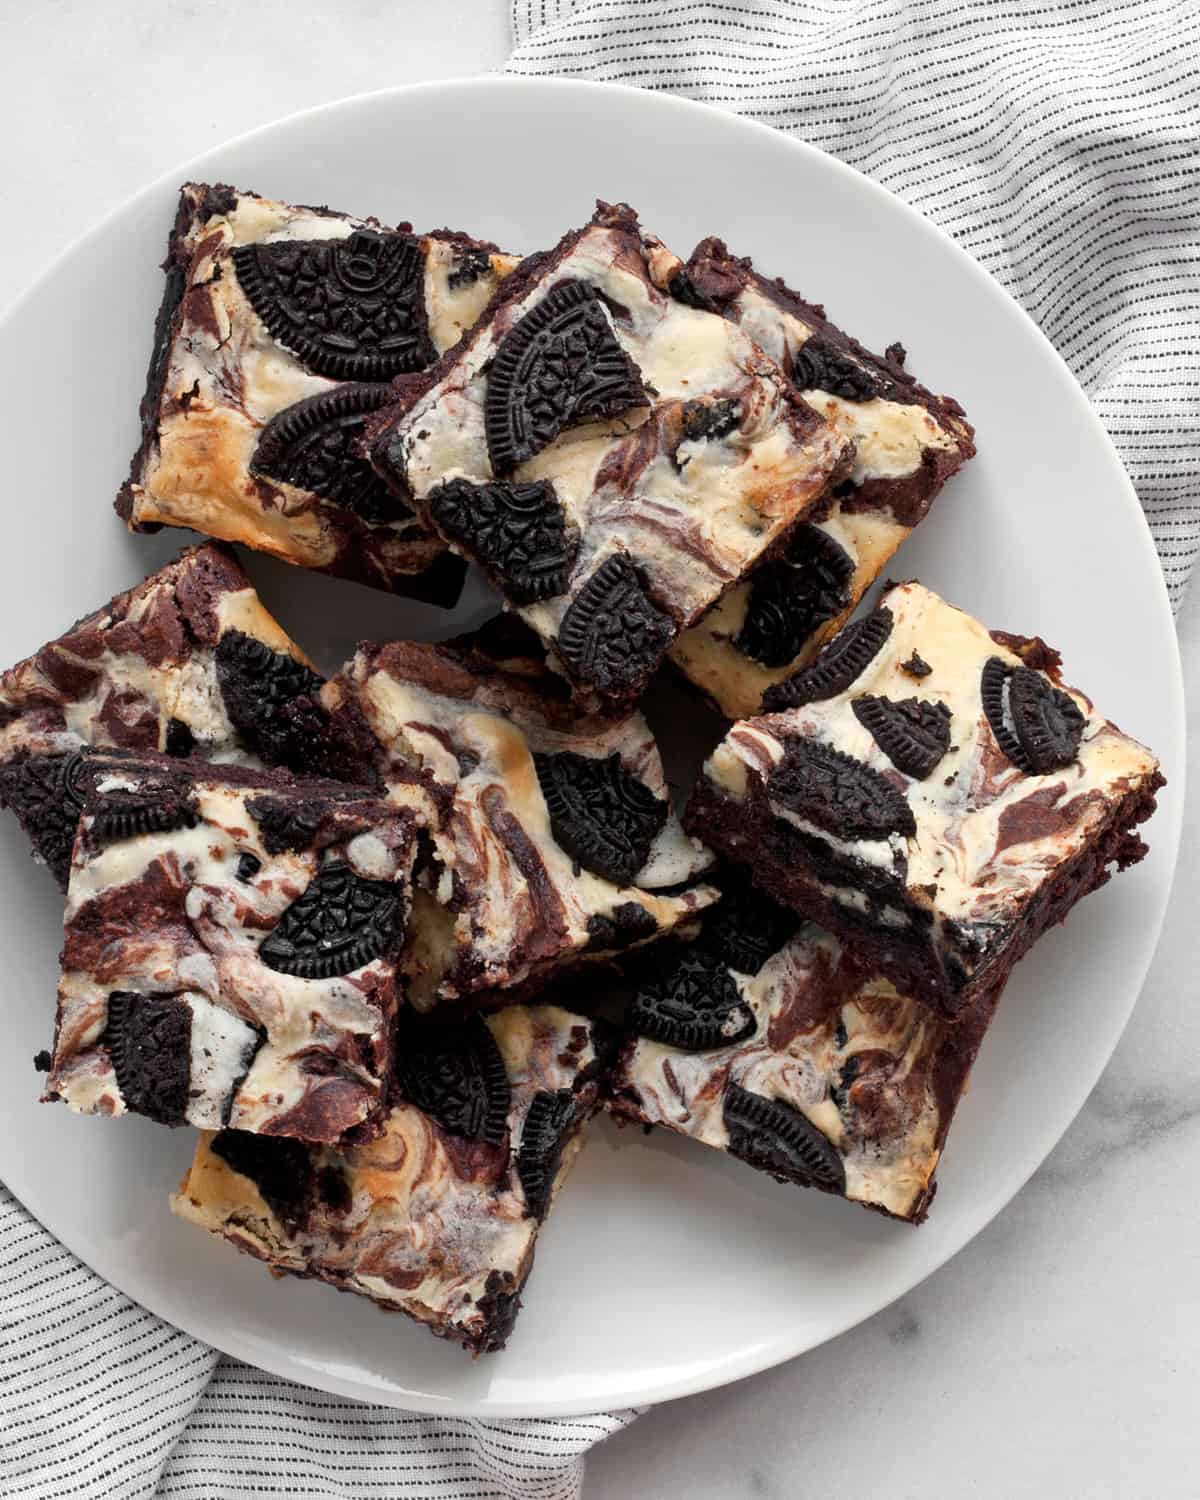 Cream cheese brownies on a plate.